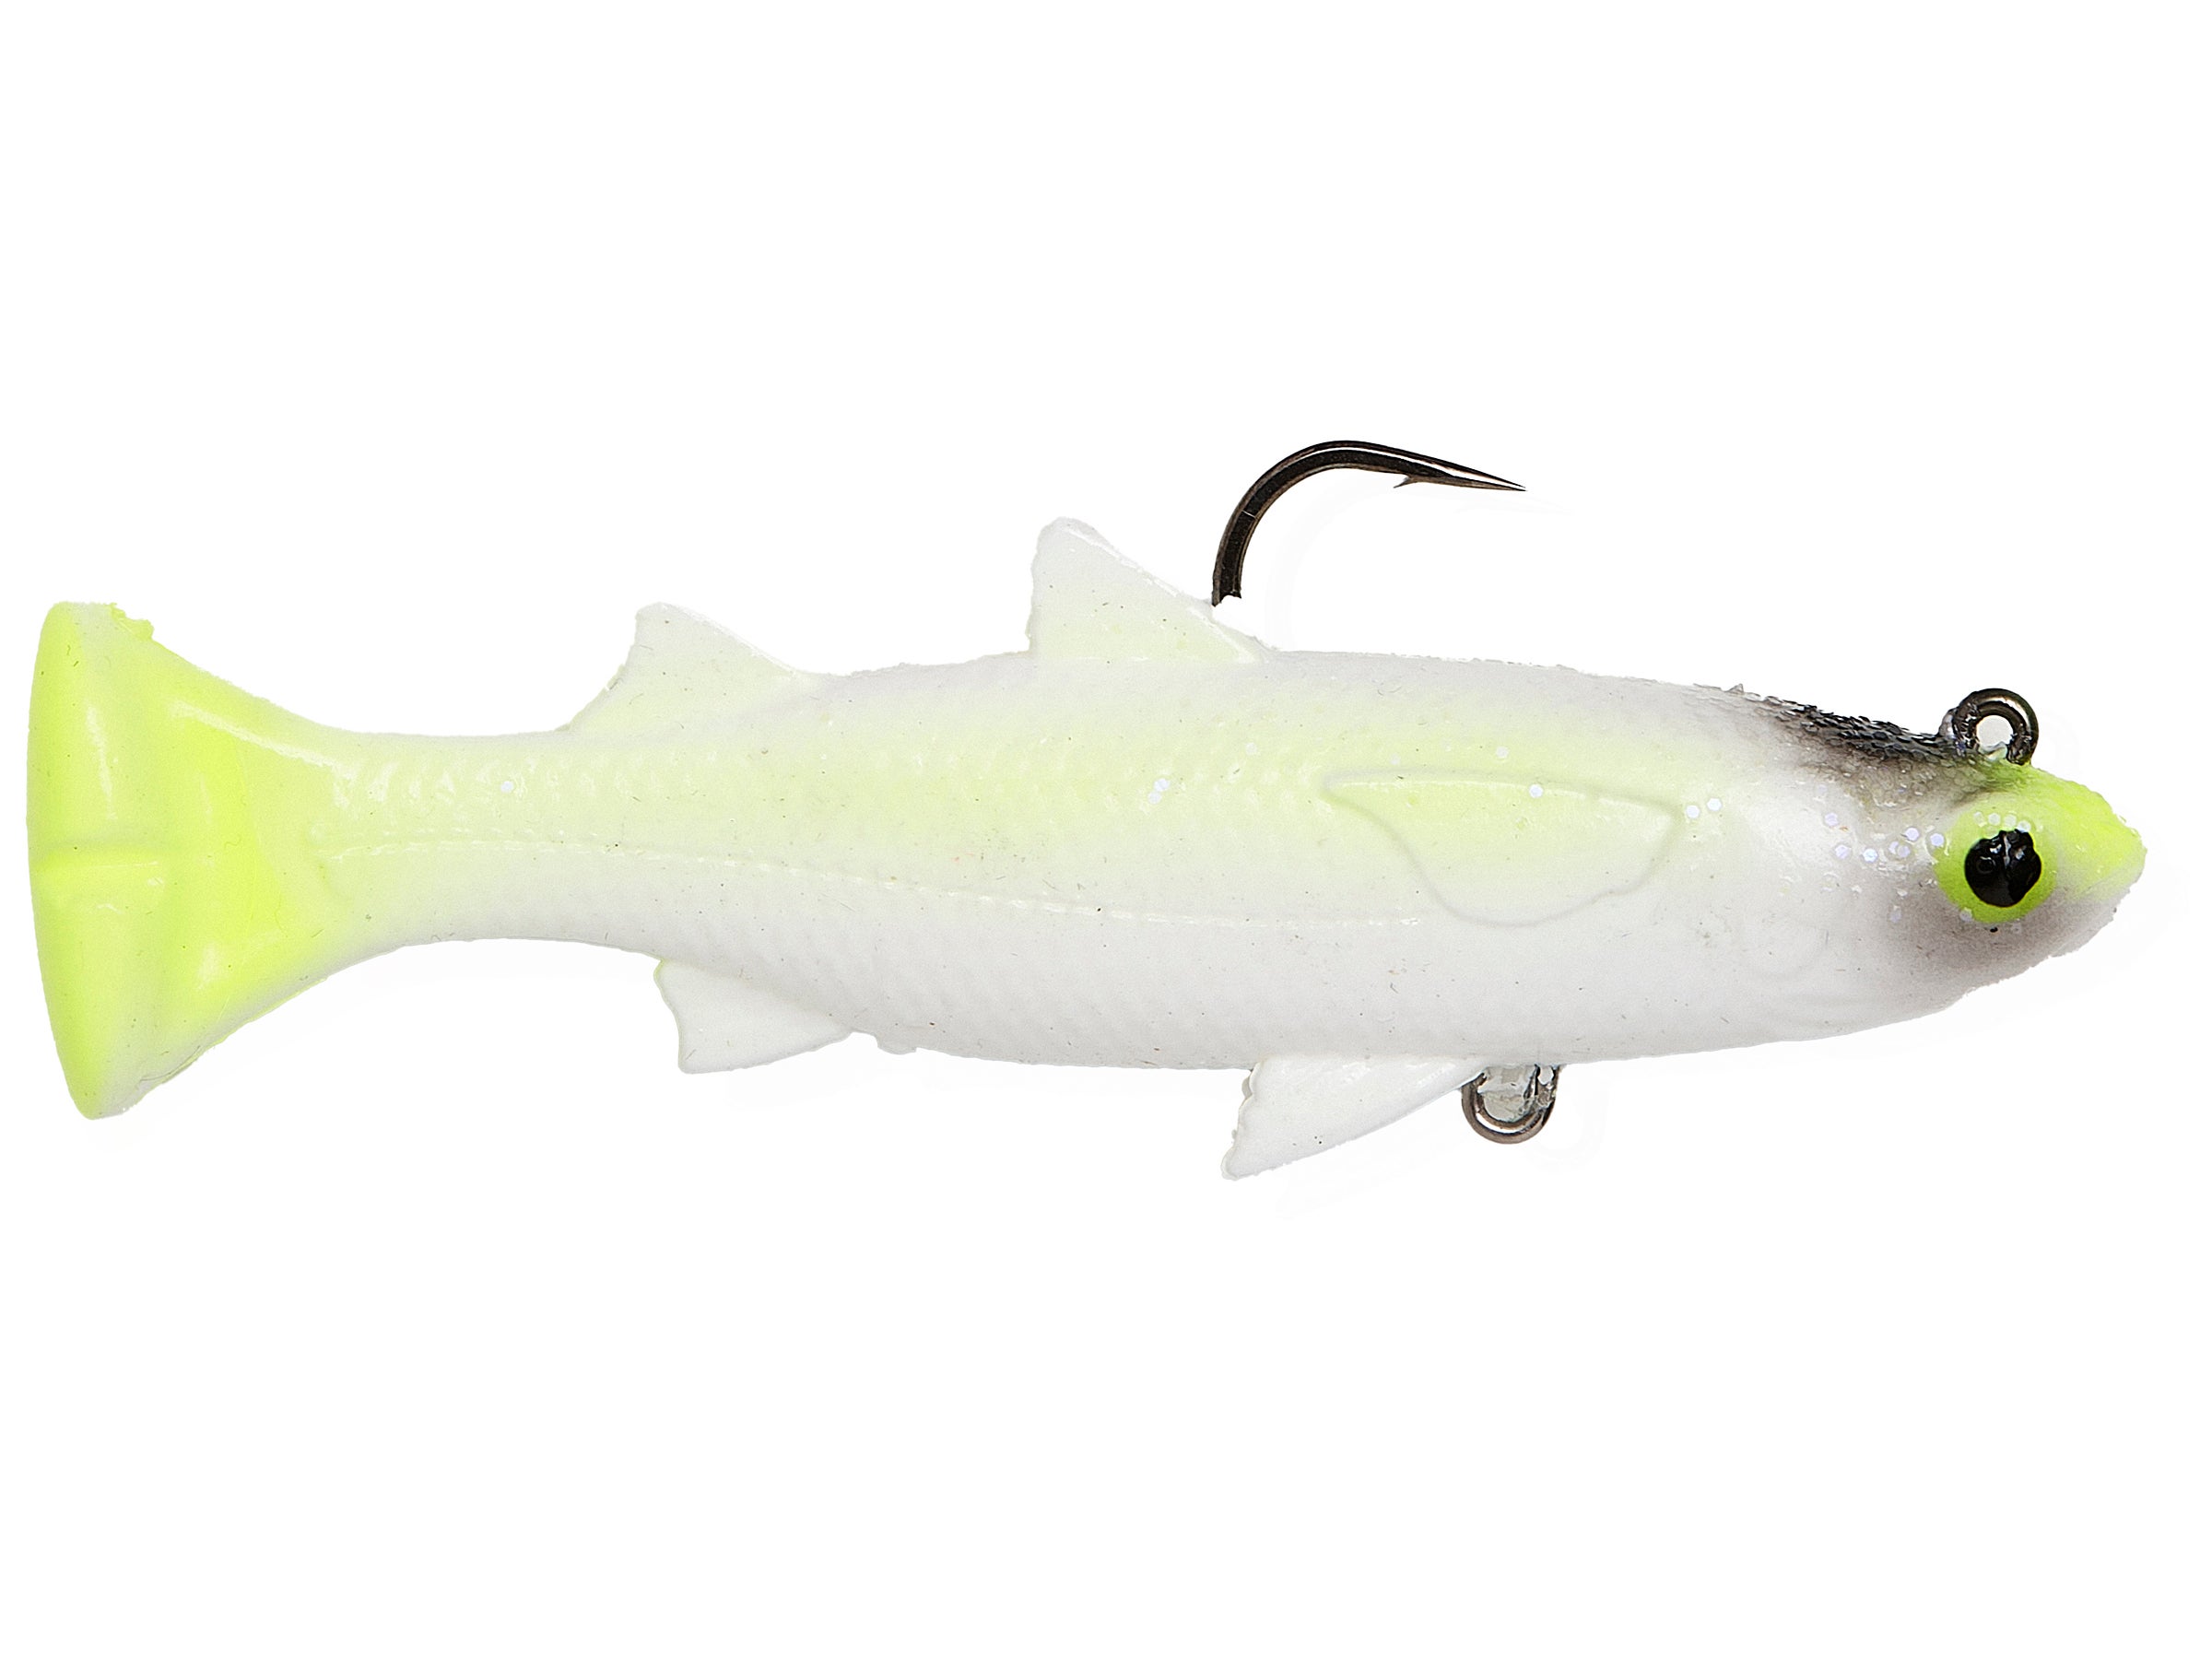 Hand Painted Seatrout Redfish Sinking Ultra Realistic Inshore Lure| for Snook Mullet Lure Tarpon Built in Rattle Savage Gear Pulse Tail Mullet RTF Saltwater Swimbait 4 & 5